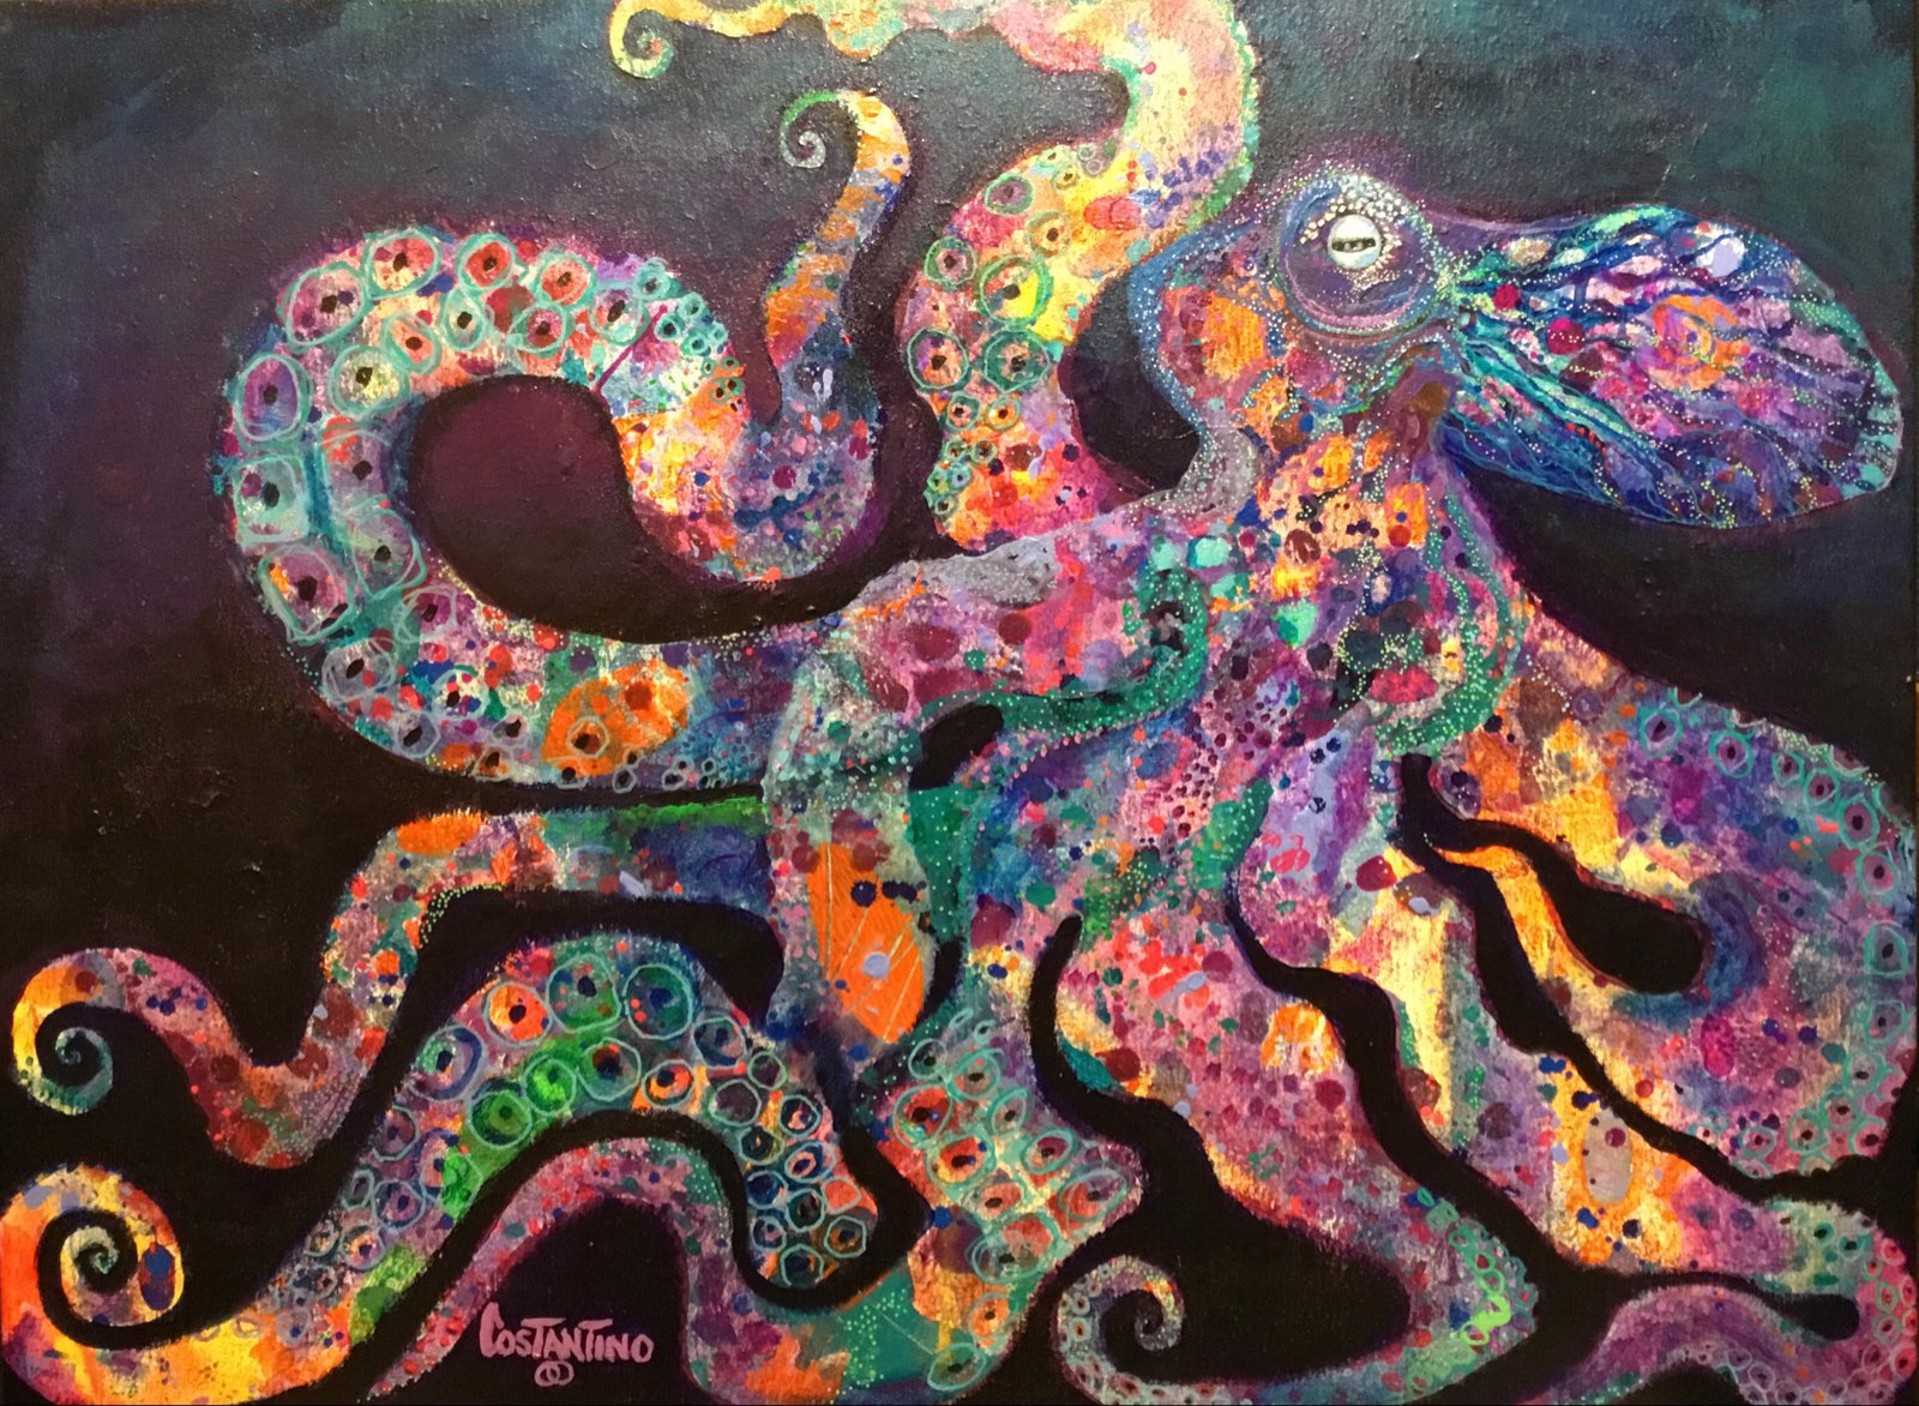 Cryptopus by Augustine Costantino